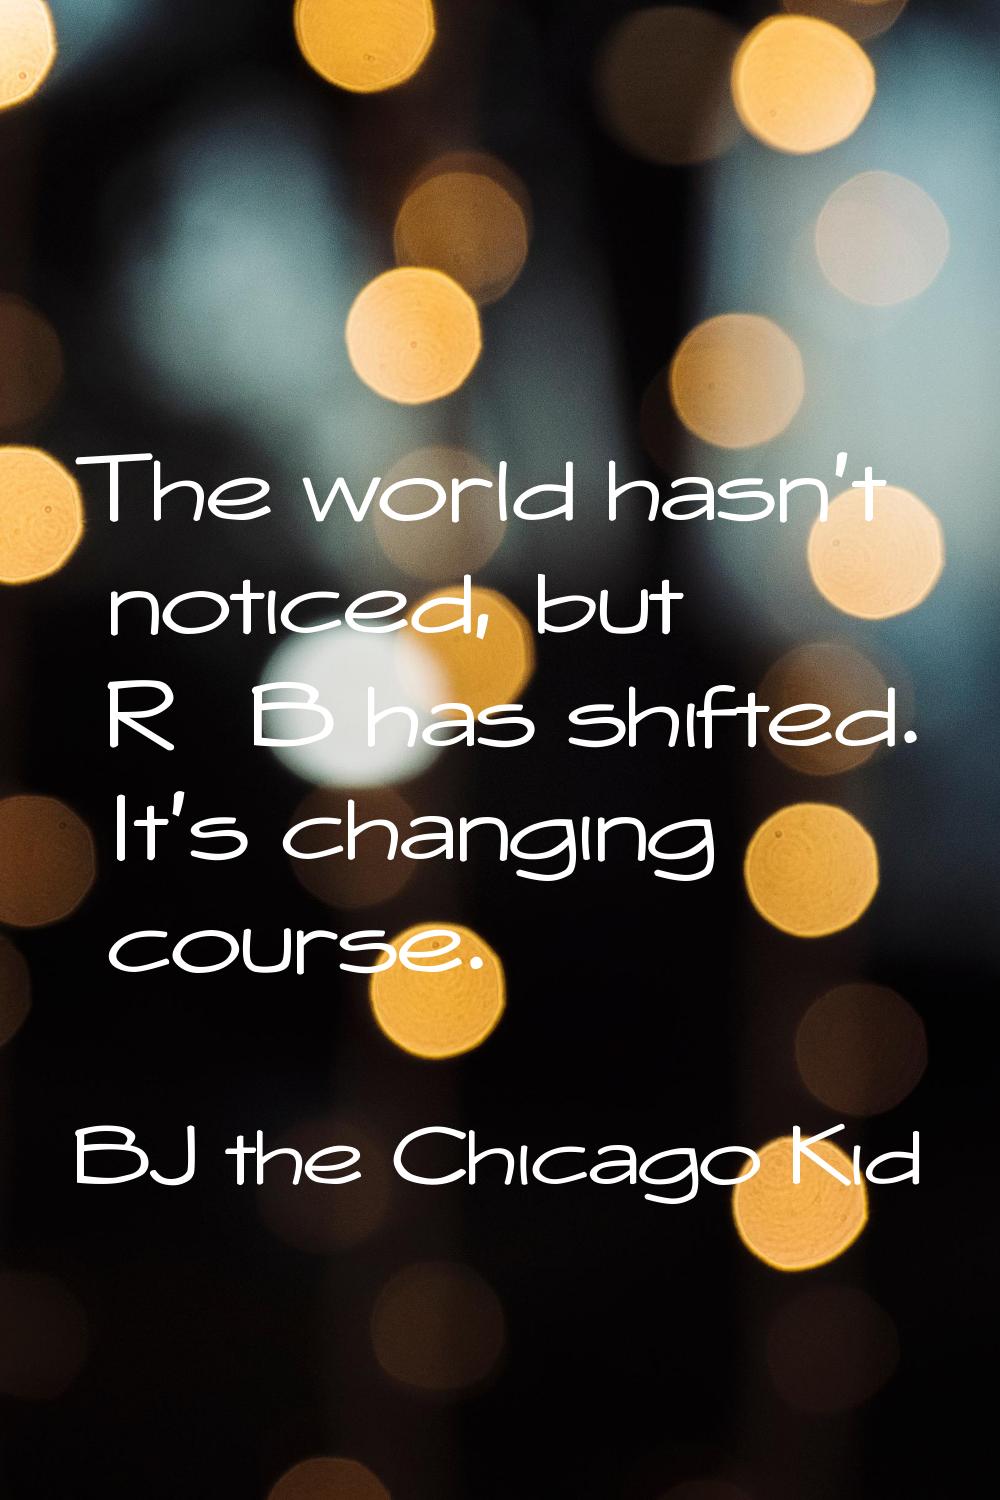 The world hasn't noticed, but R&B has shifted. It's changing course.